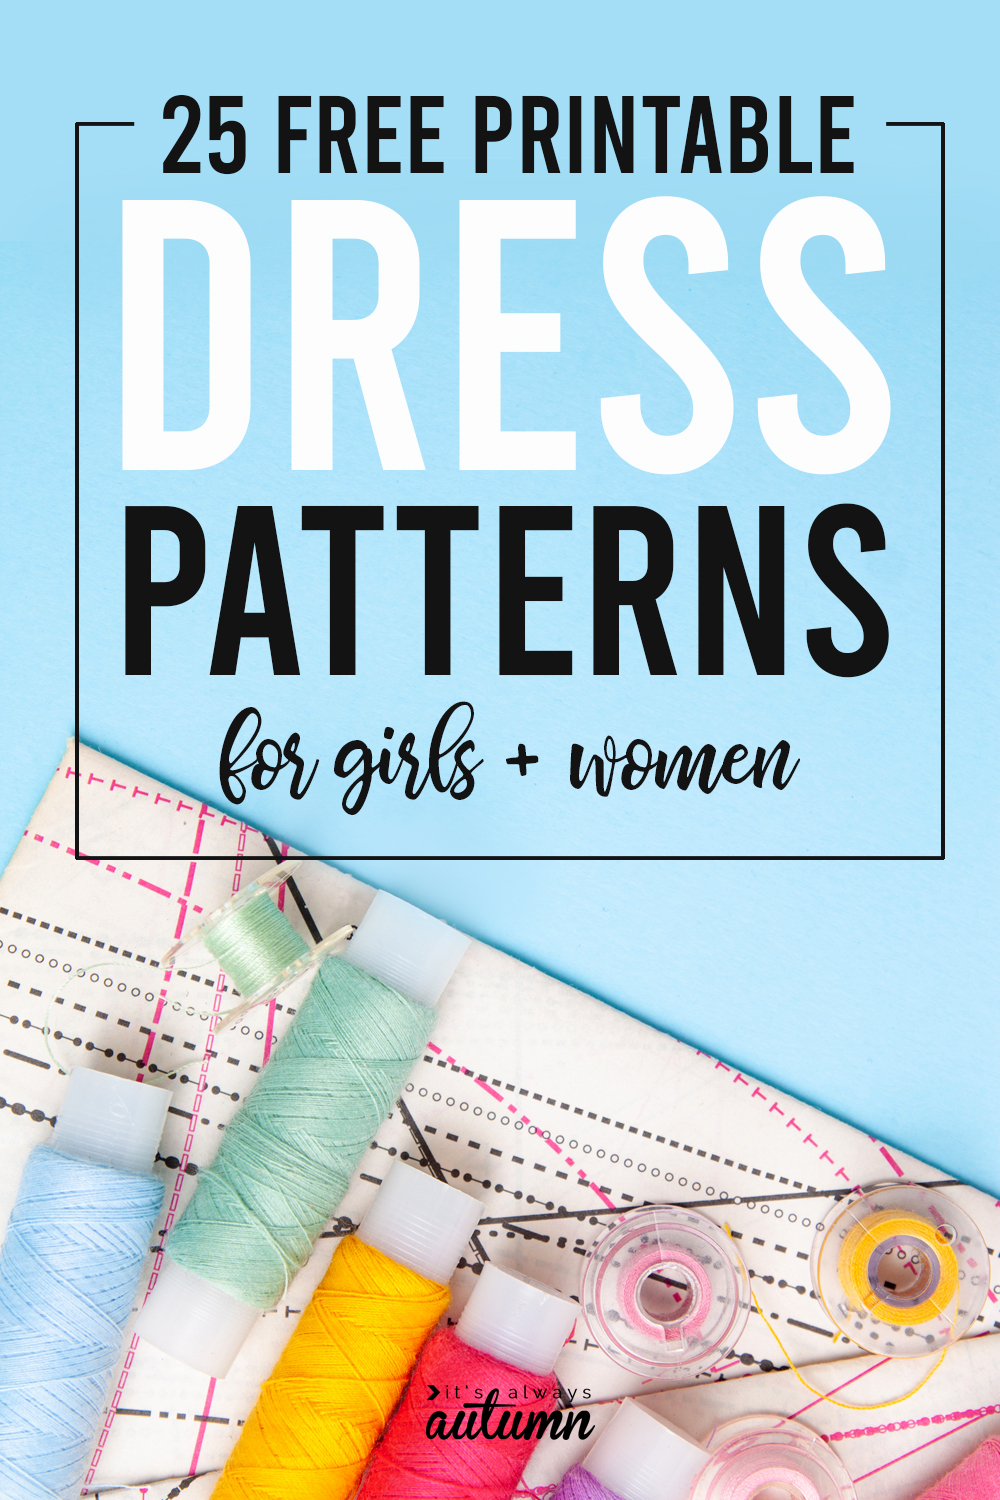 How To Make A Dress 25 Free Dress Patterns For Girls Women It s Always Autumn